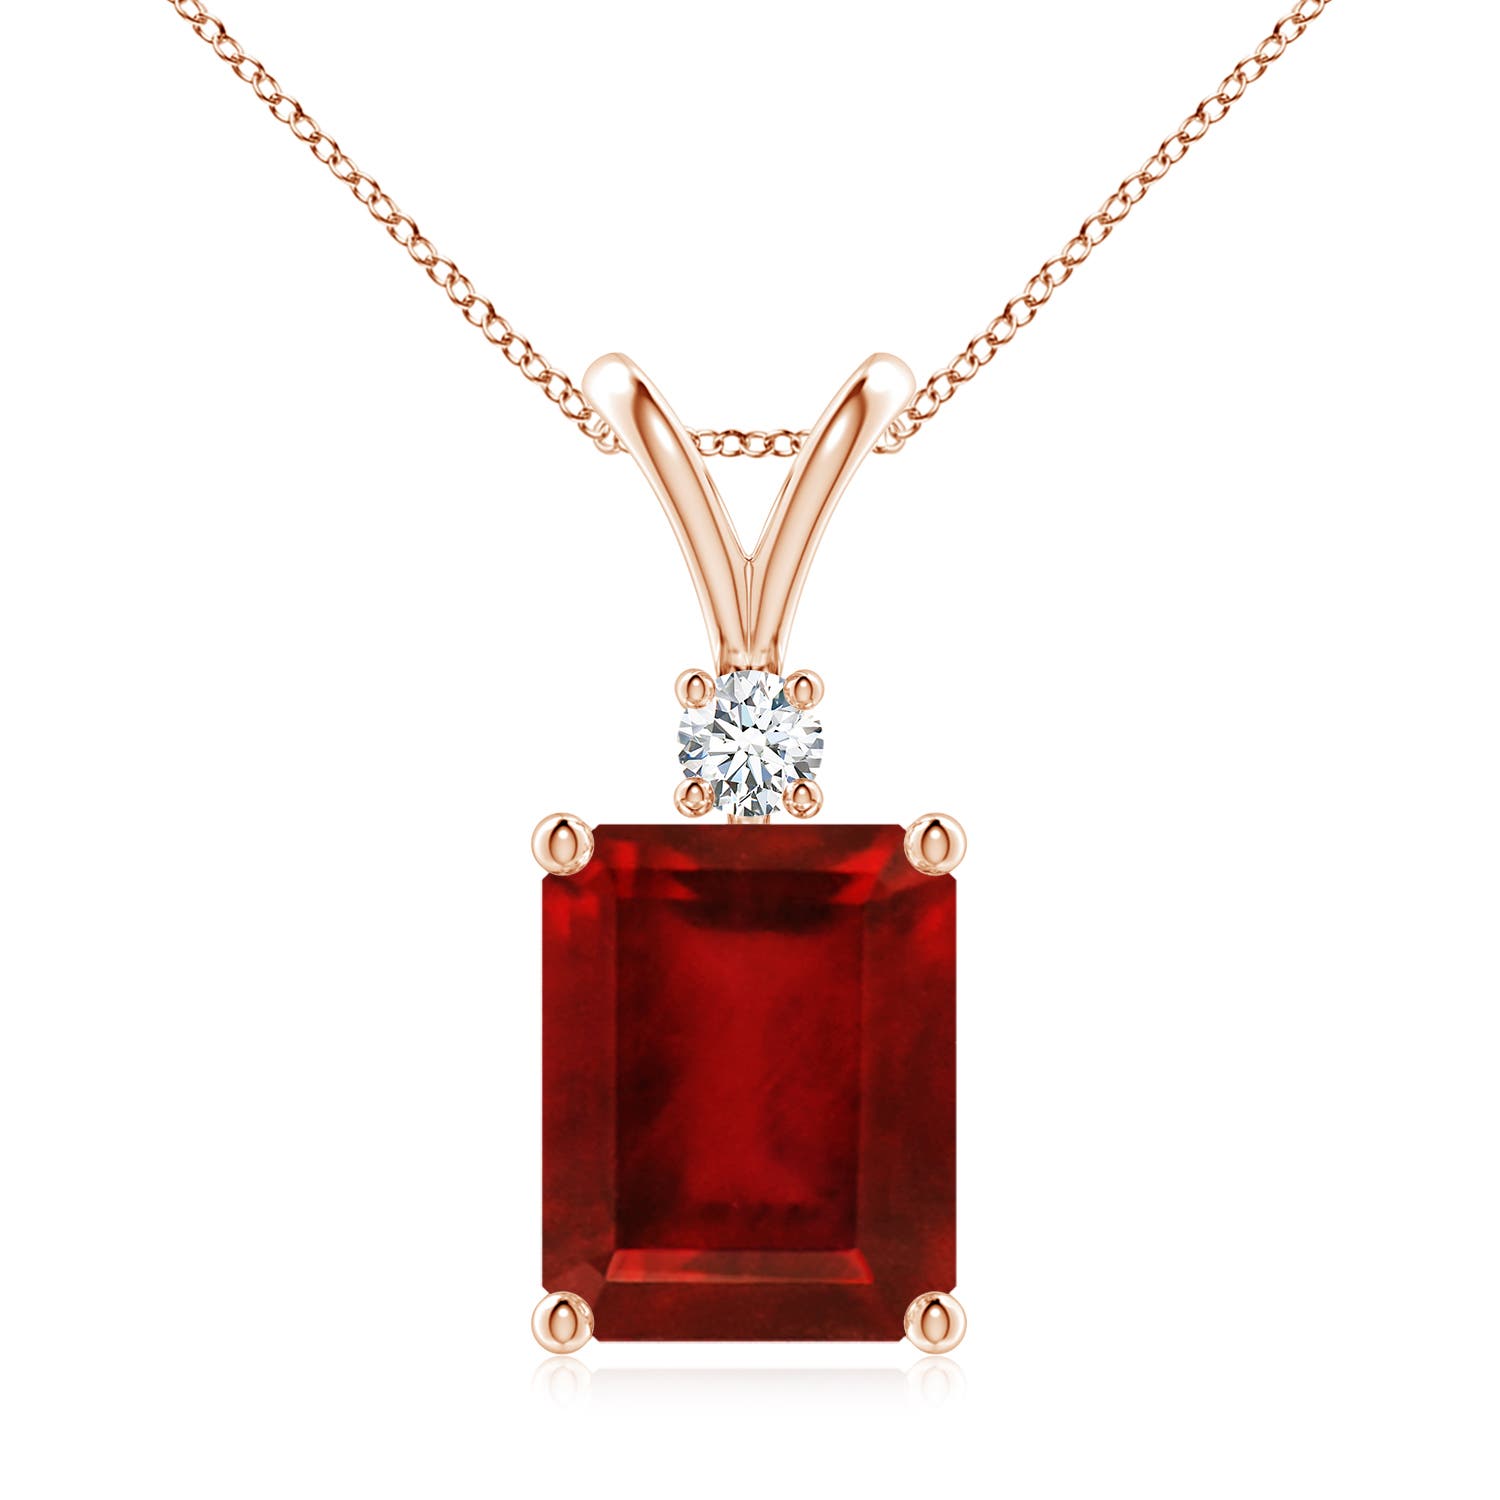 AAAA - Ruby / 4.11 CT / 14 KT Rose Gold